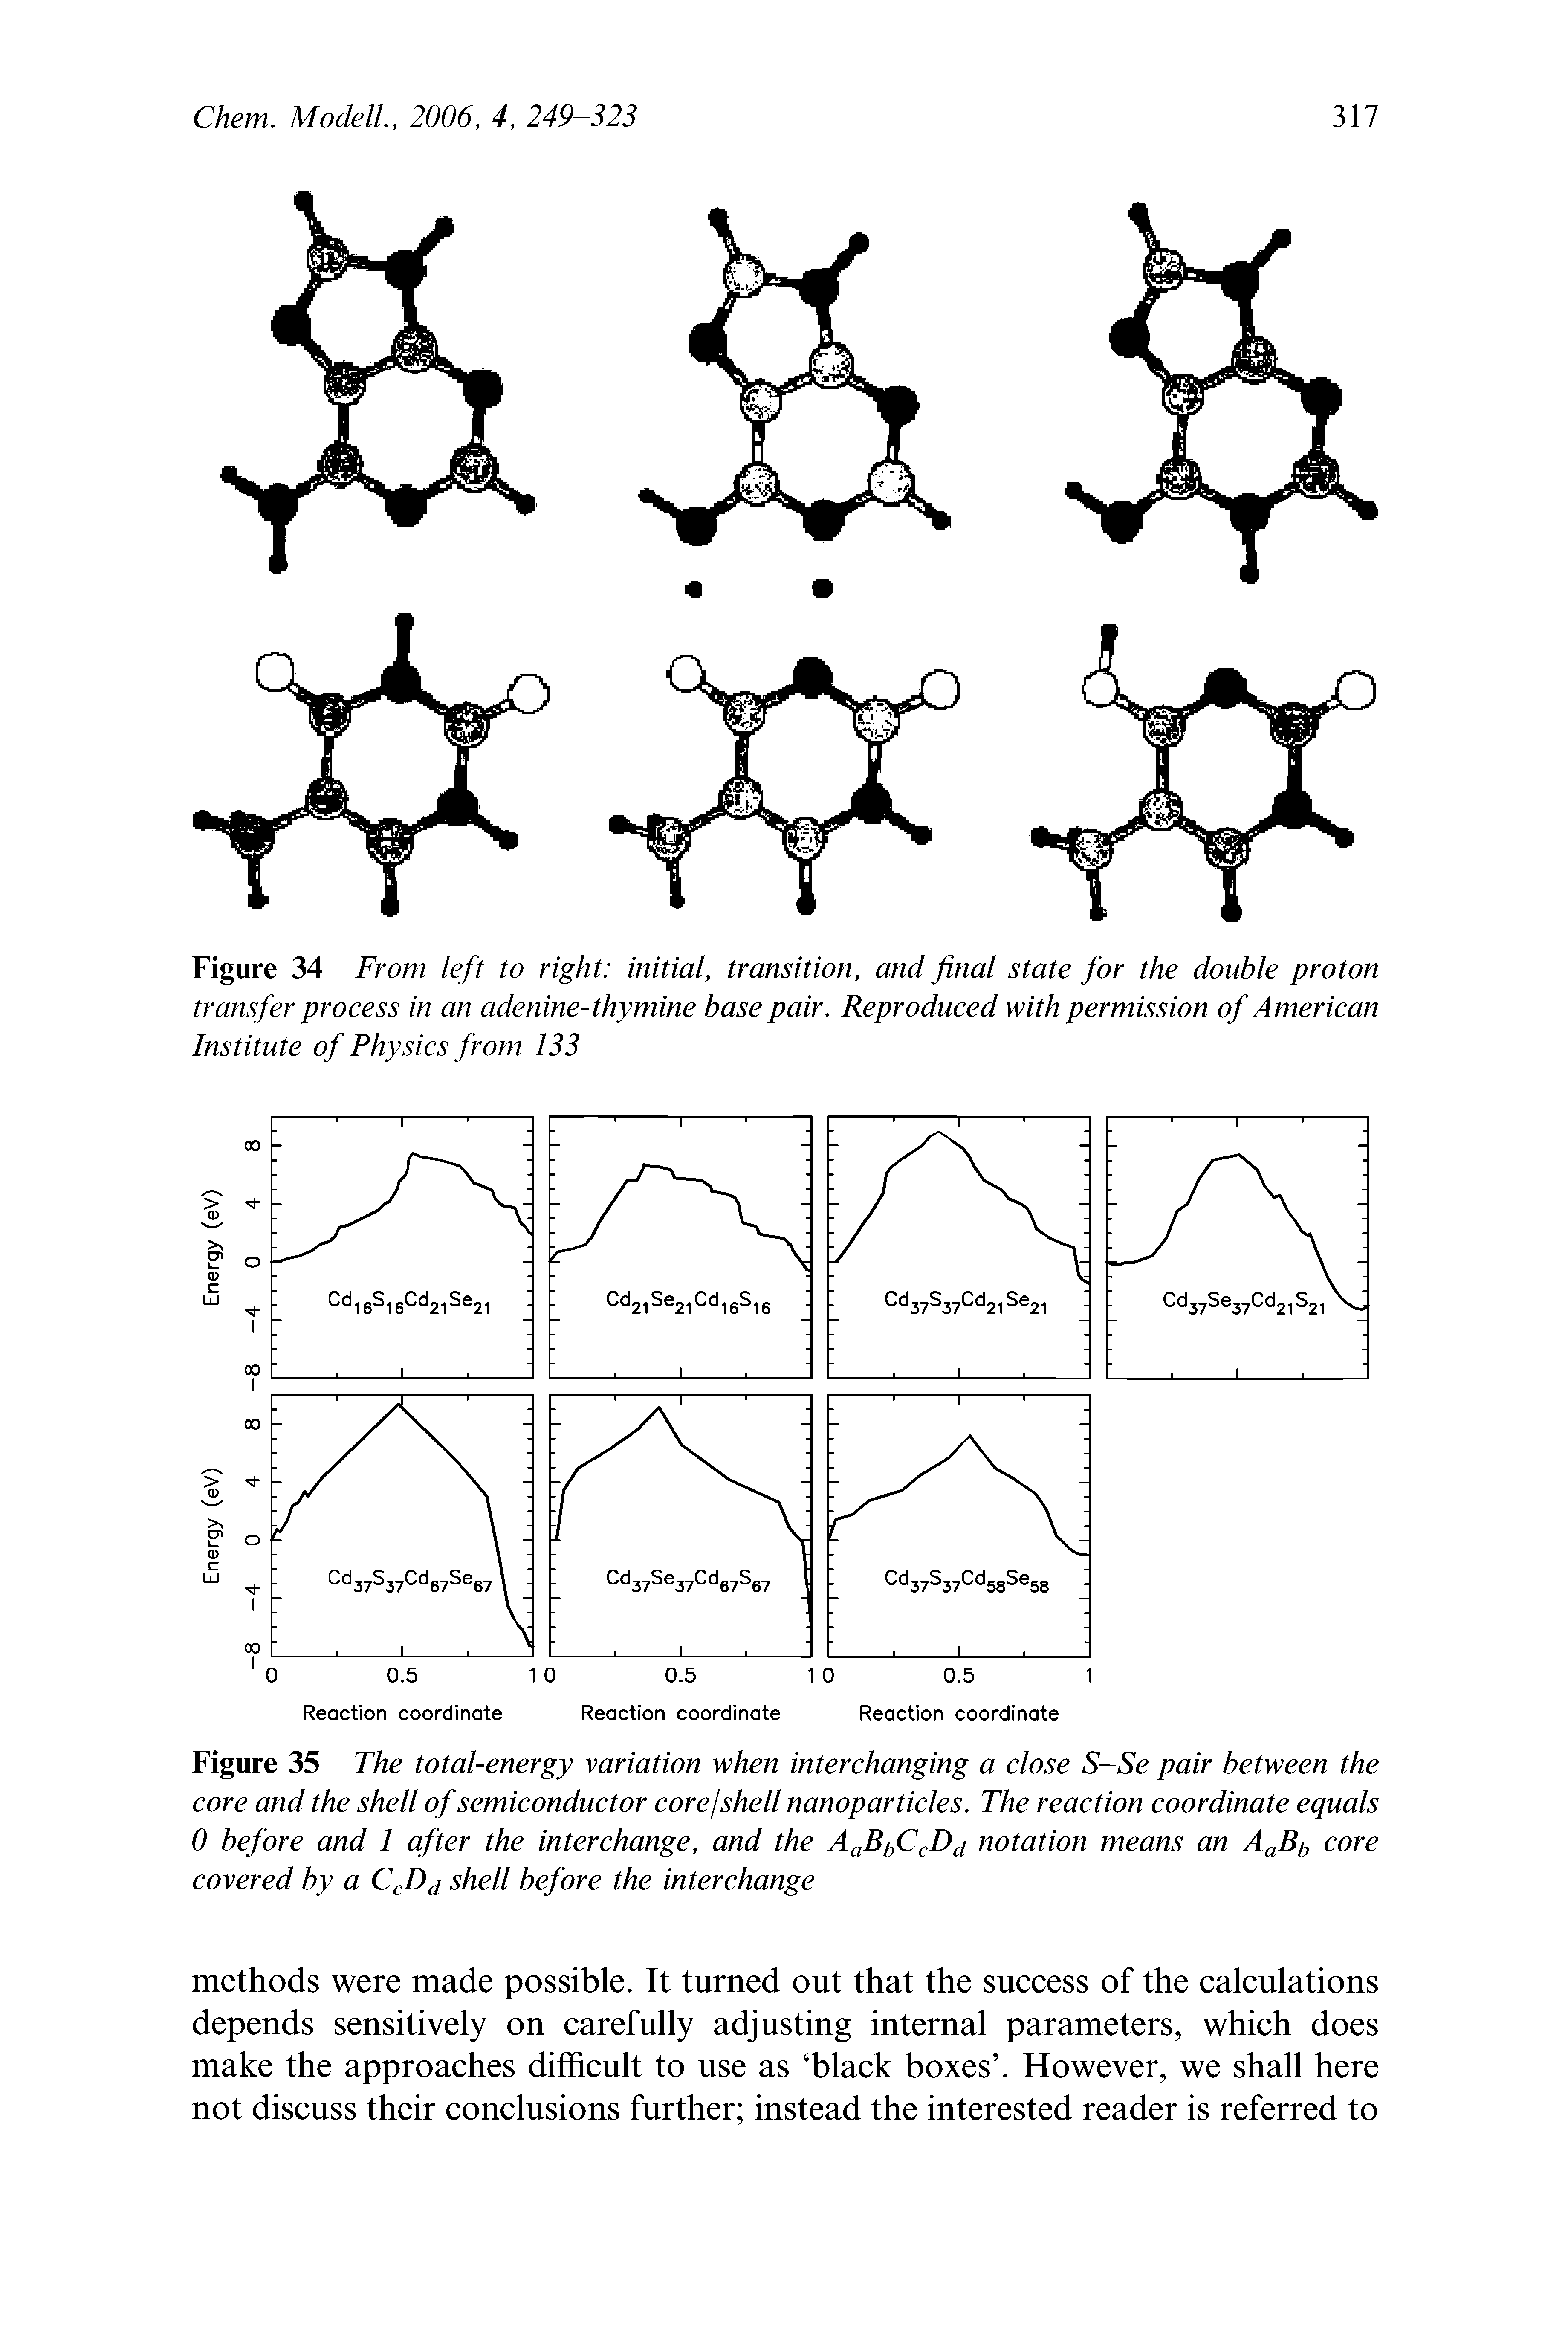 Figure 34 From left to right initial, transition, and final state for the double proton transfer process in an adenine-thymine base pair. Reproduced with permission of American Institute of Physics from 133...